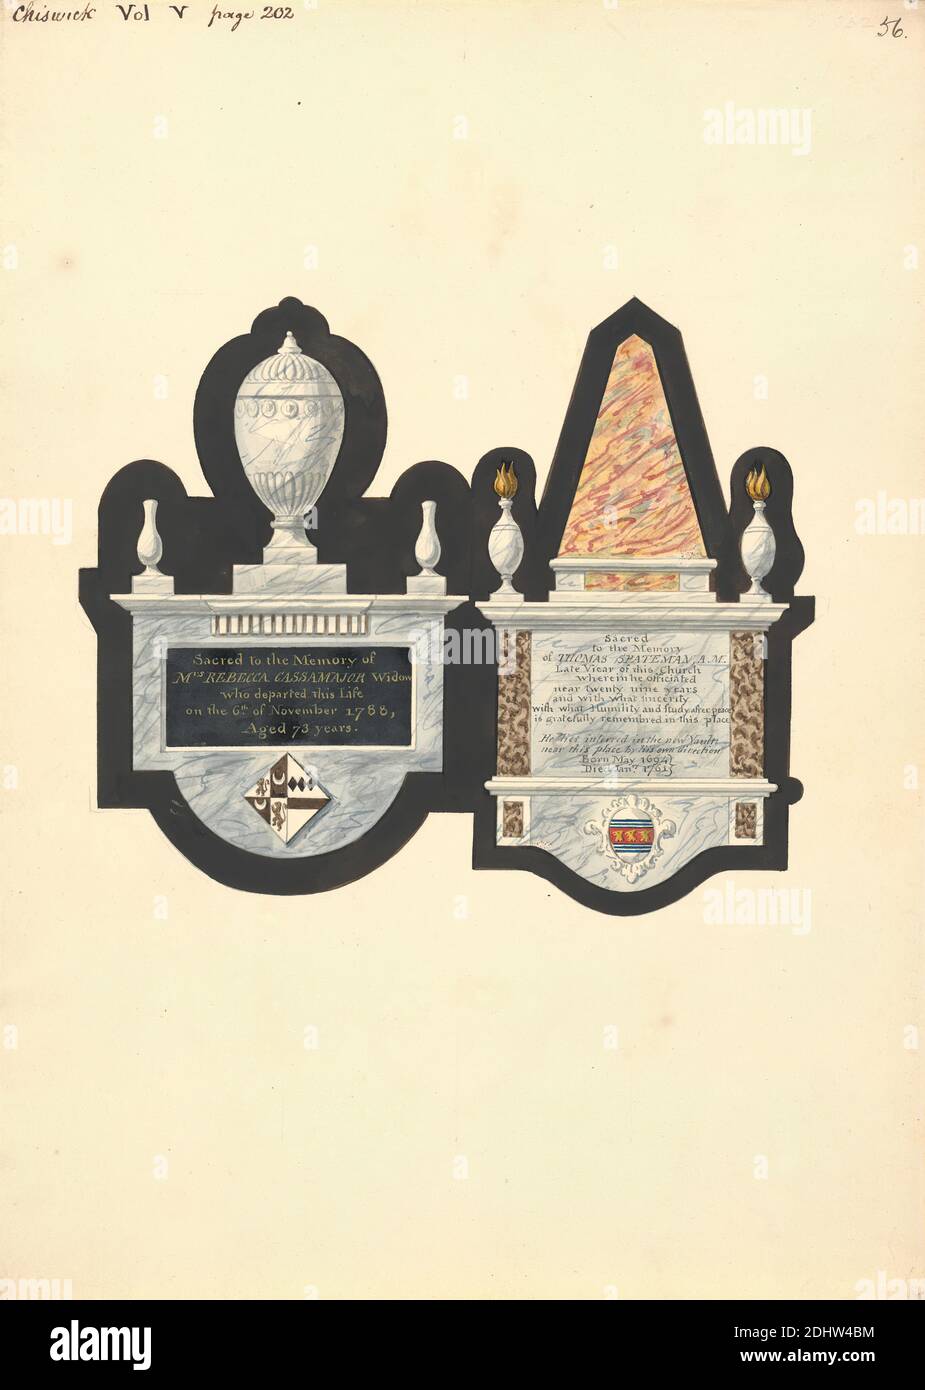 Monuments to Mrs. Rebecca Cassamajor and Thoma Spateman, Chiswick Church, Daniel Lysons, 1762–1834, British, between 1796 and 1811, Aquarell, Graphit, and Pen and black ink on mäßig dick, slightly textured, Cream wove paper, Sheet: 14 7/8 × 10 3/4 Zoll (37.8 × 27.3 cm), architektonisches Motiv, historisches Motiv, Denkmal, Chiswick Church, England, Europa, London, Vereinigtes Königreich Stockfoto